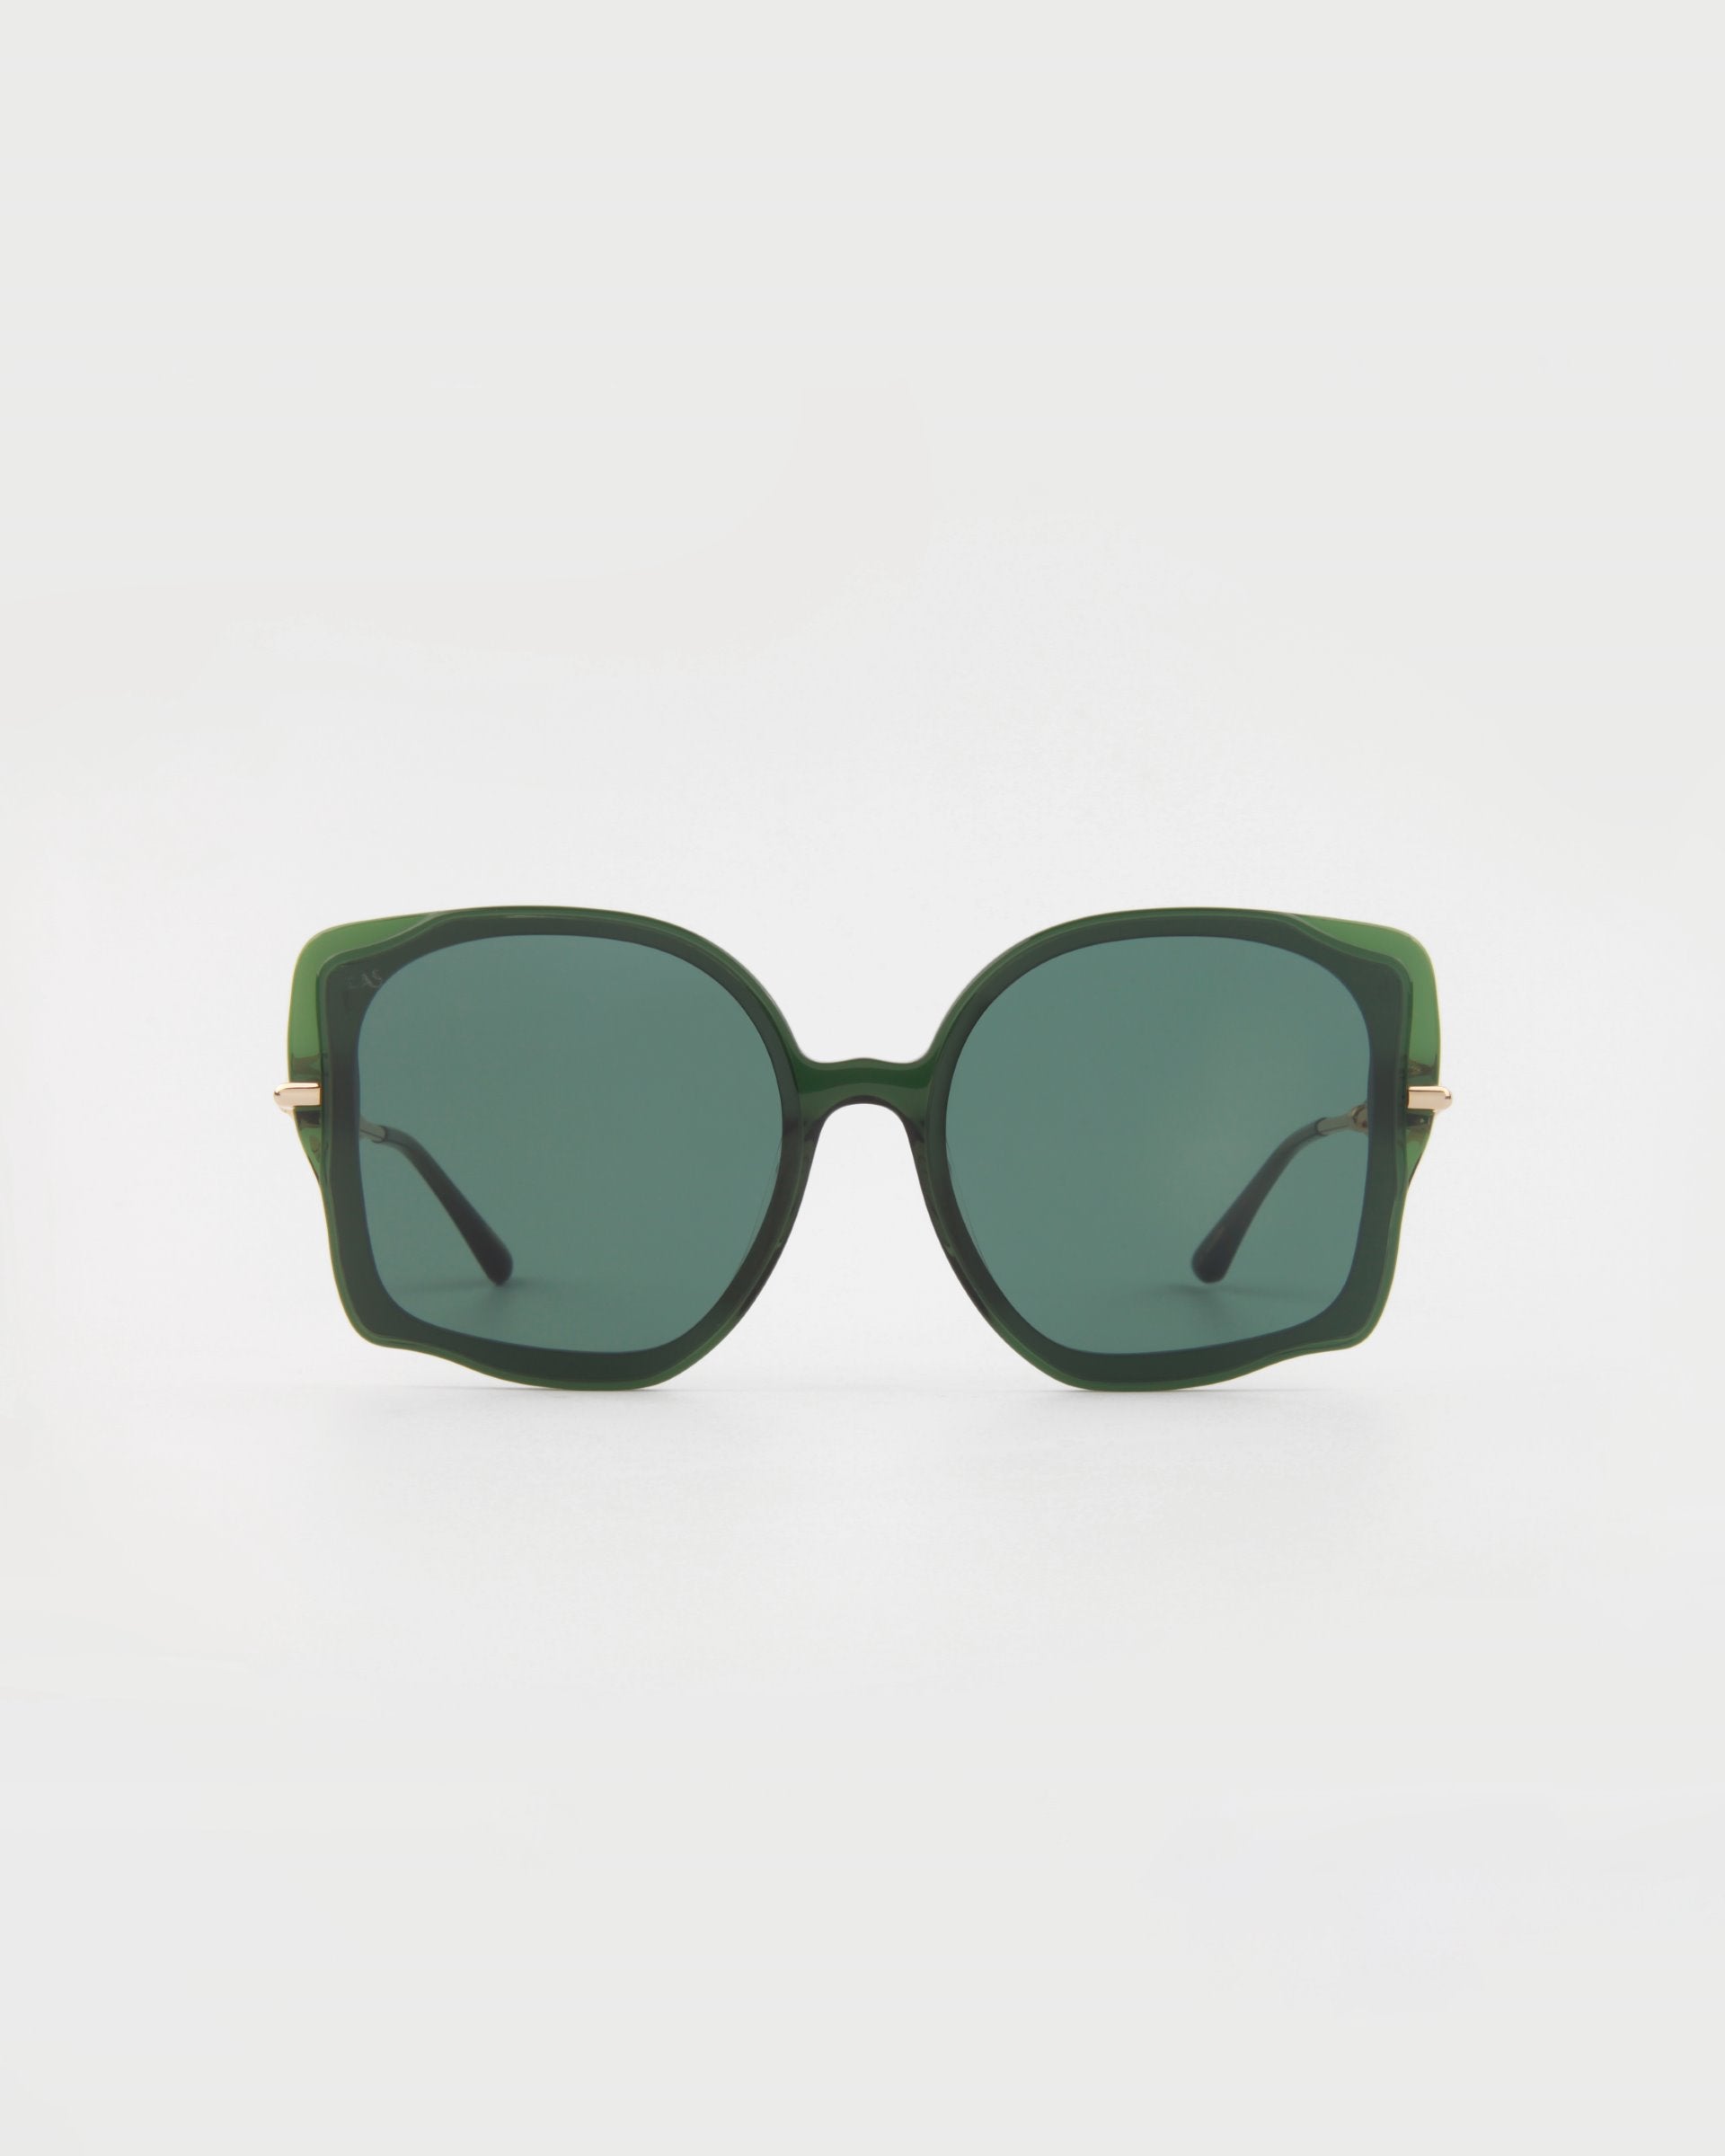 A pair of stylish, oversized square Fahrenheit sunglasses with dark green lenses and matching handmade acetate frames from For Art&#39;s Sake®. The temples feature 18-karat gold-plated accents near the hinges. The Fahrenheit sunglasses are set against a plain white background.